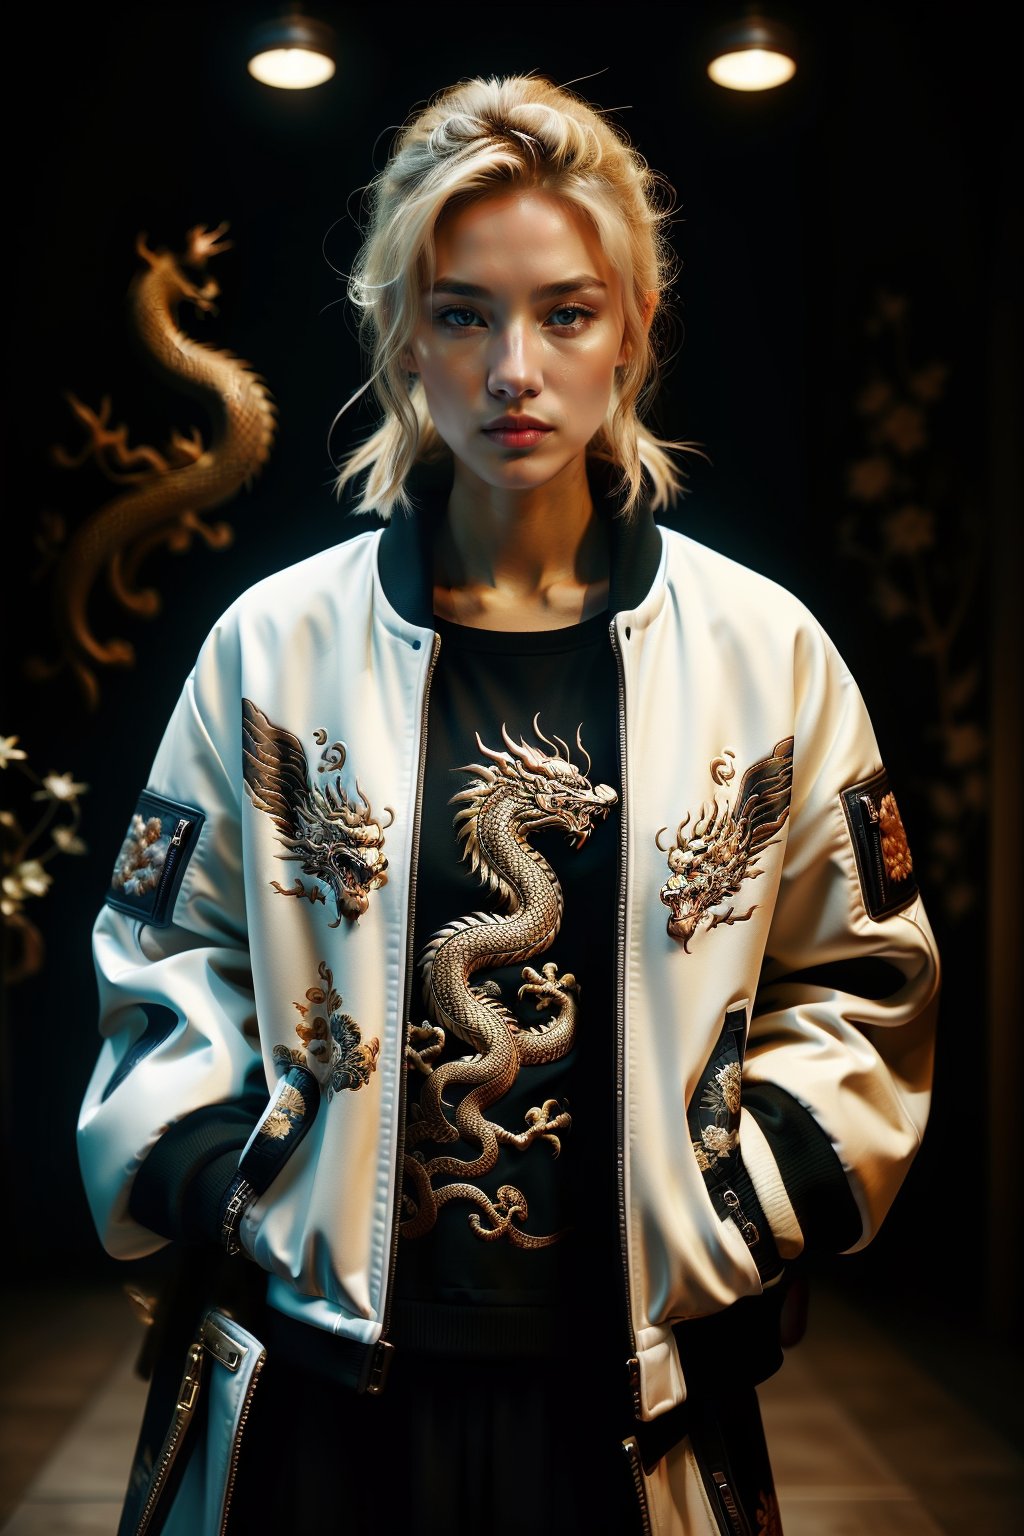 wo_dragonjacket01, (facing the camera),(a blonde woman), wearing a white jacket with a dragon design, 8k, masterpiece, award-winning photography, high resolution